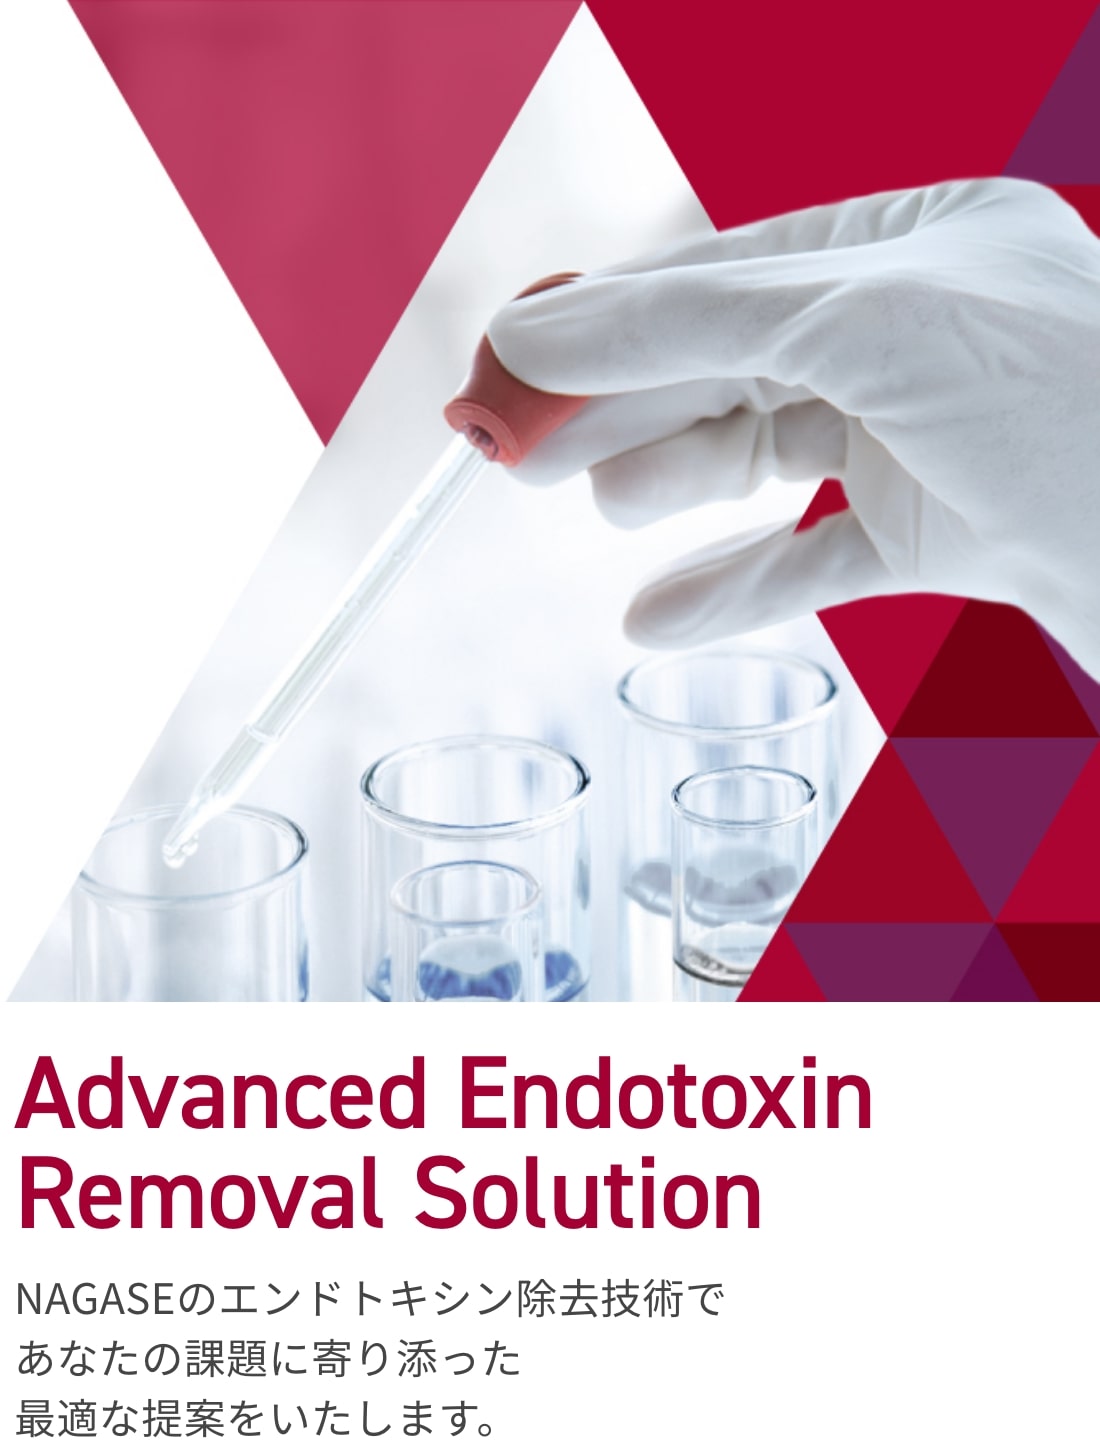 Your New Partner for Endotoxin Control